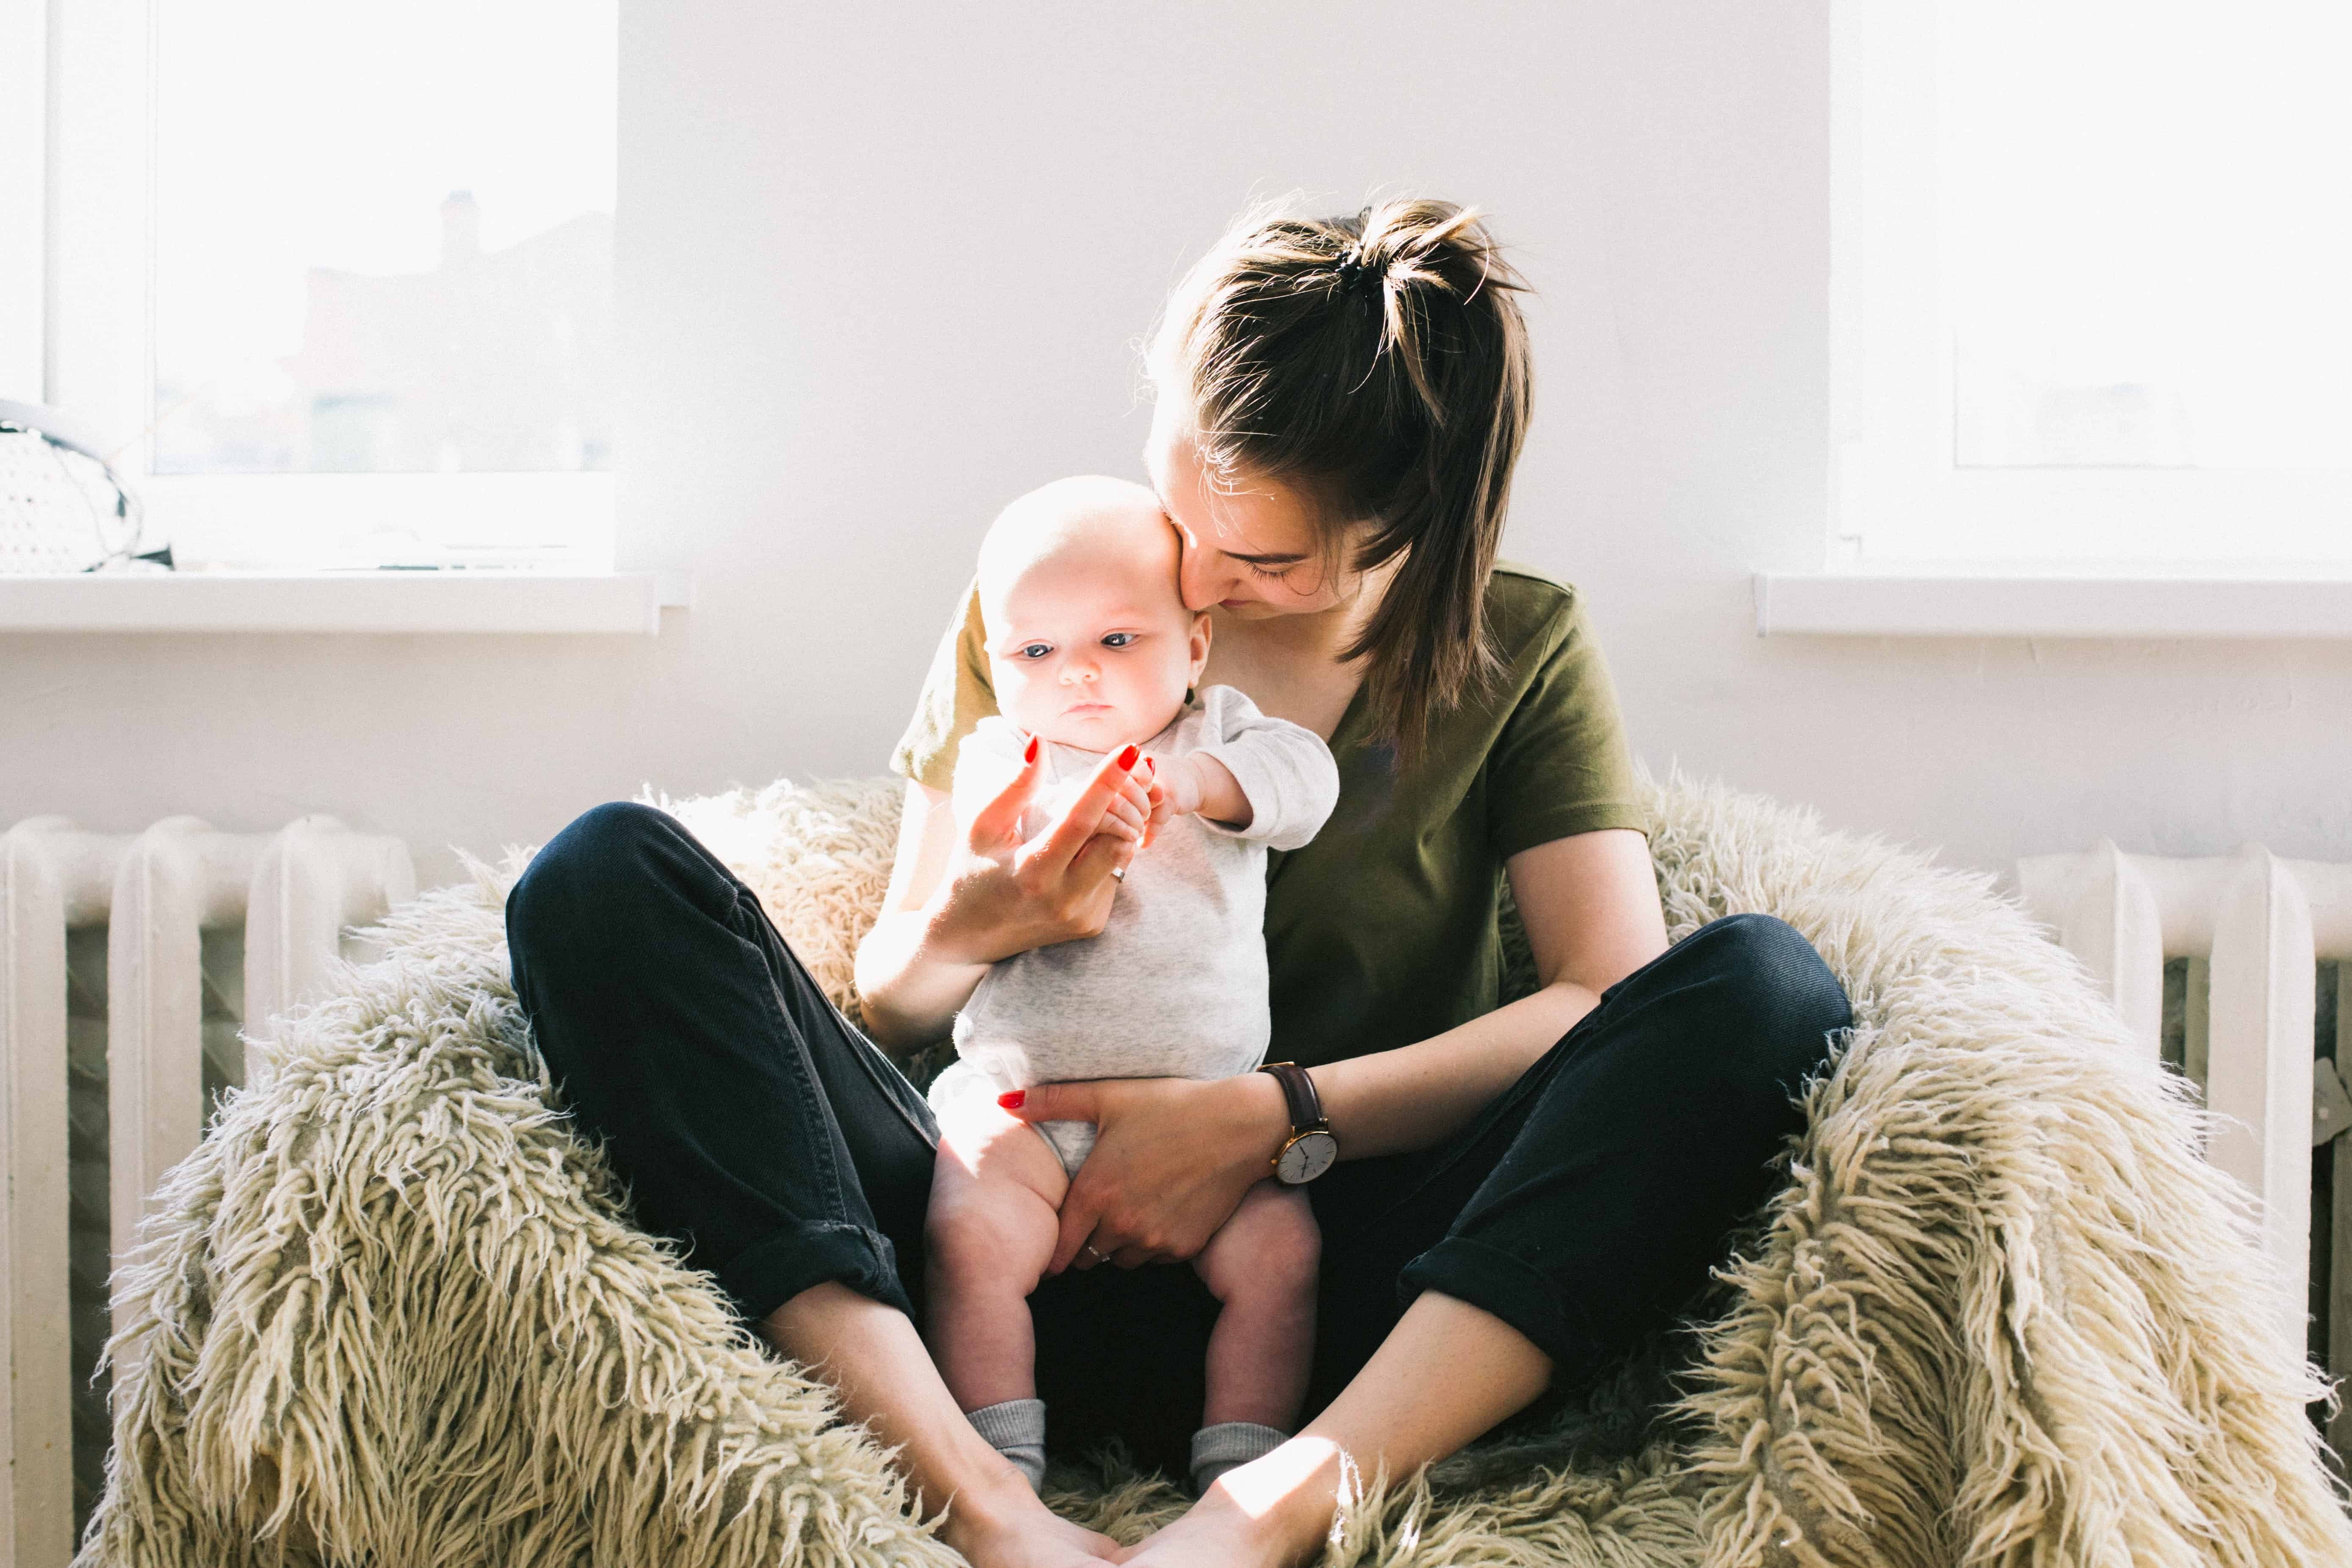 6 Easy Ways To Improve Mom Life Balance That Will Keep You Out Of The Nuthouse